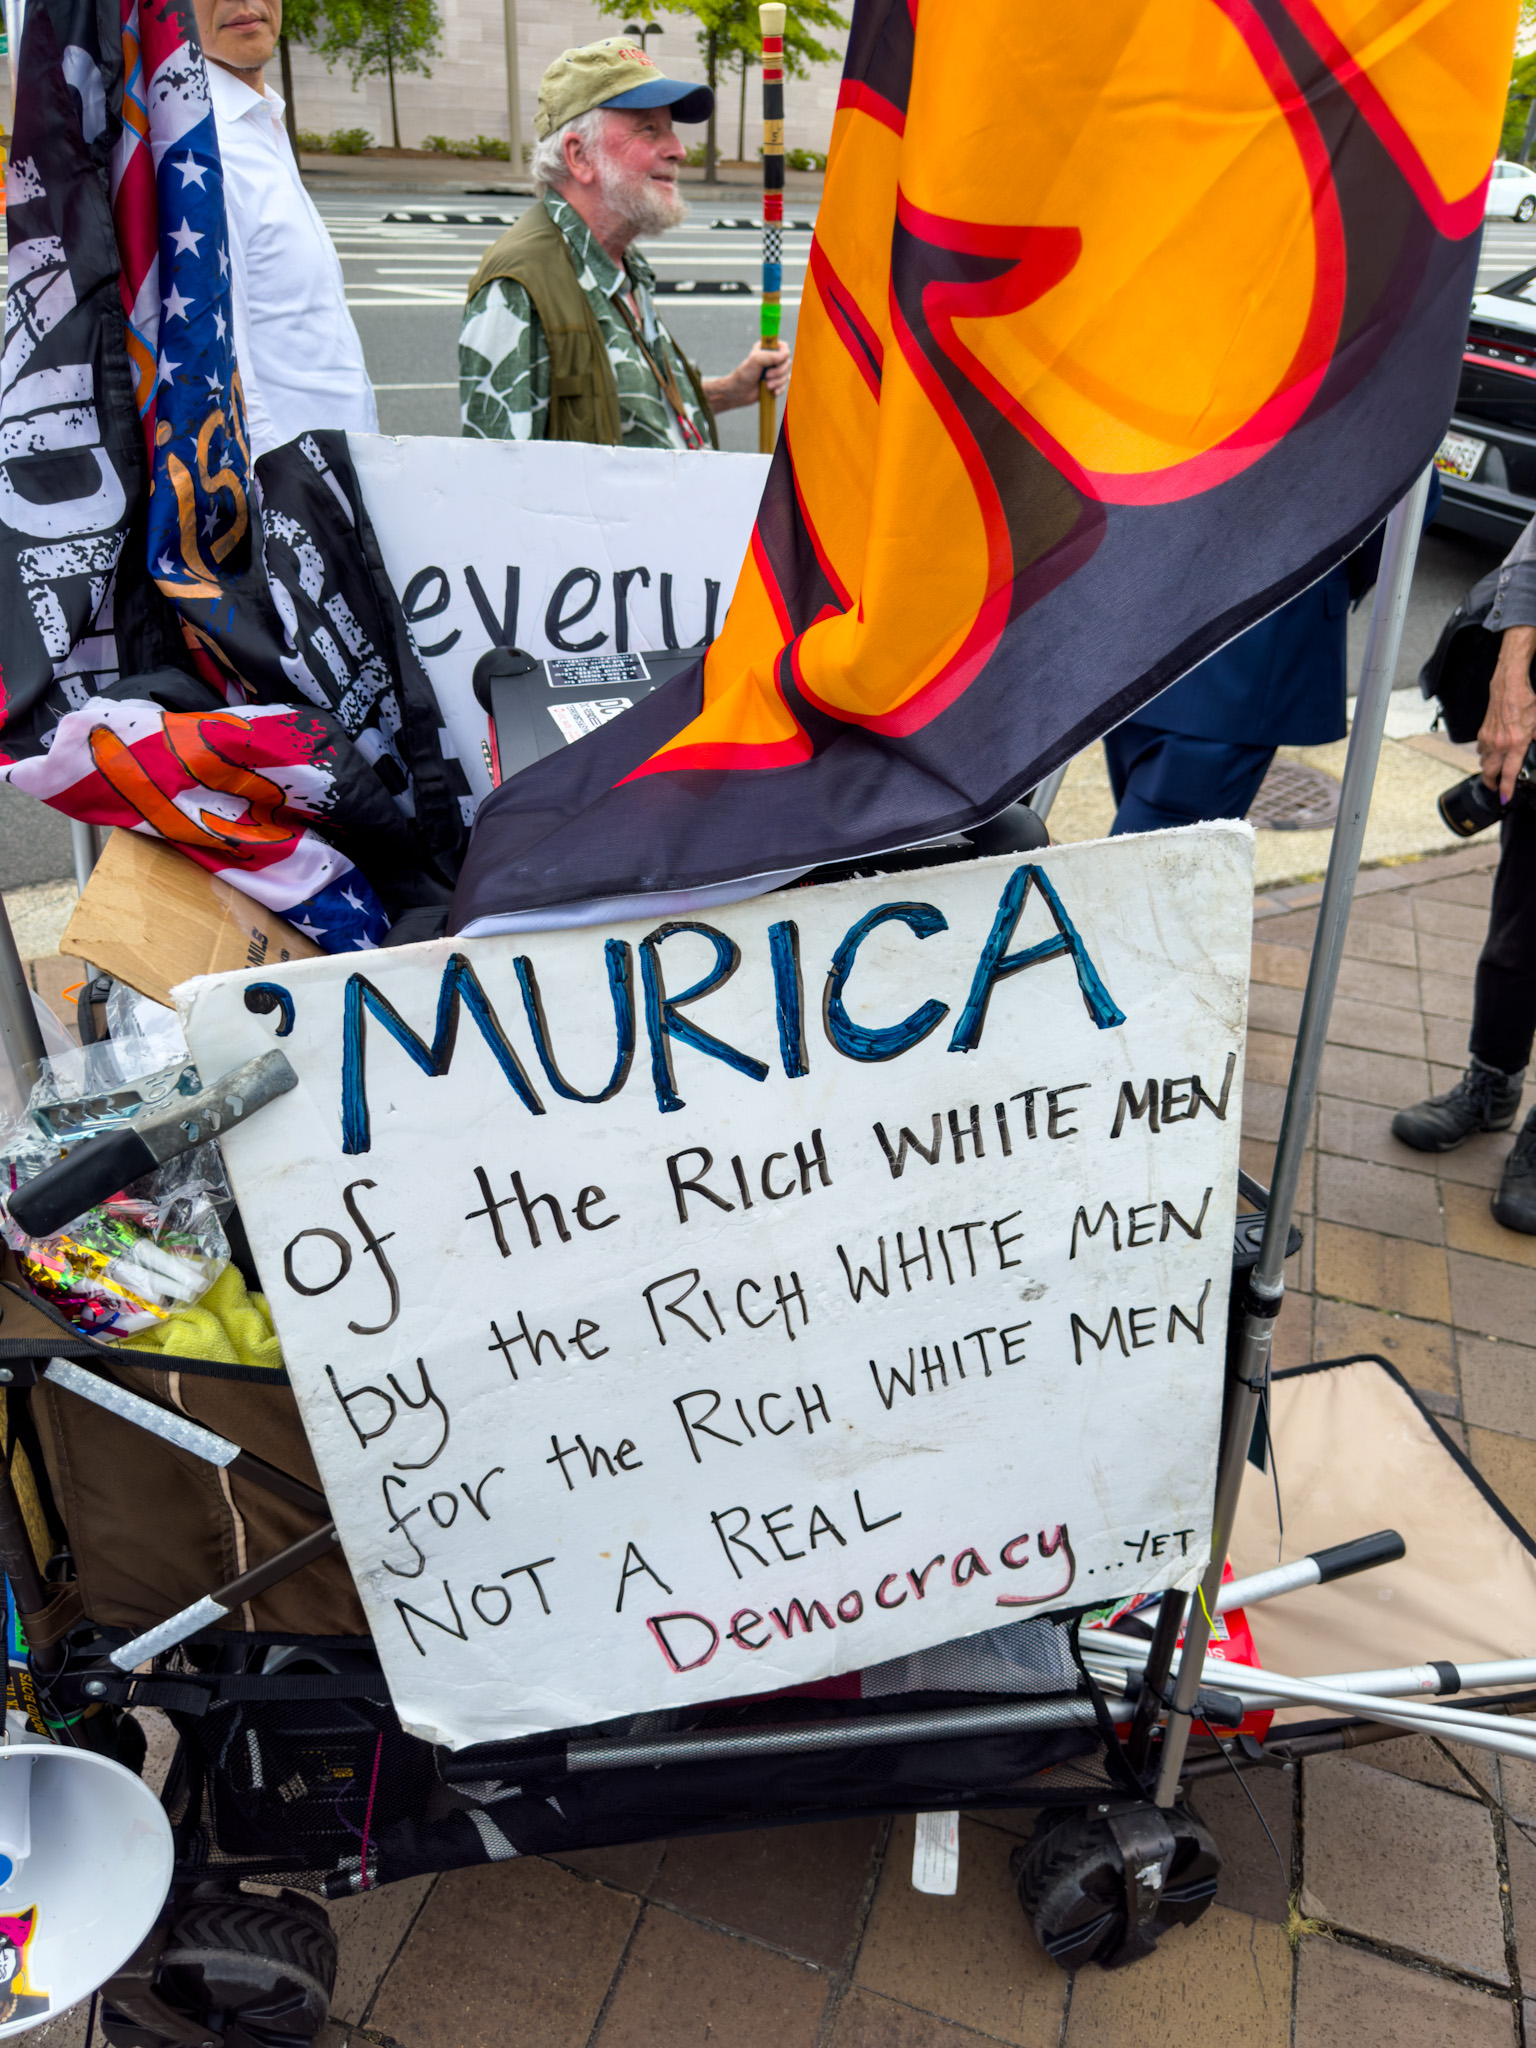 Murica - Not a Real Democracy